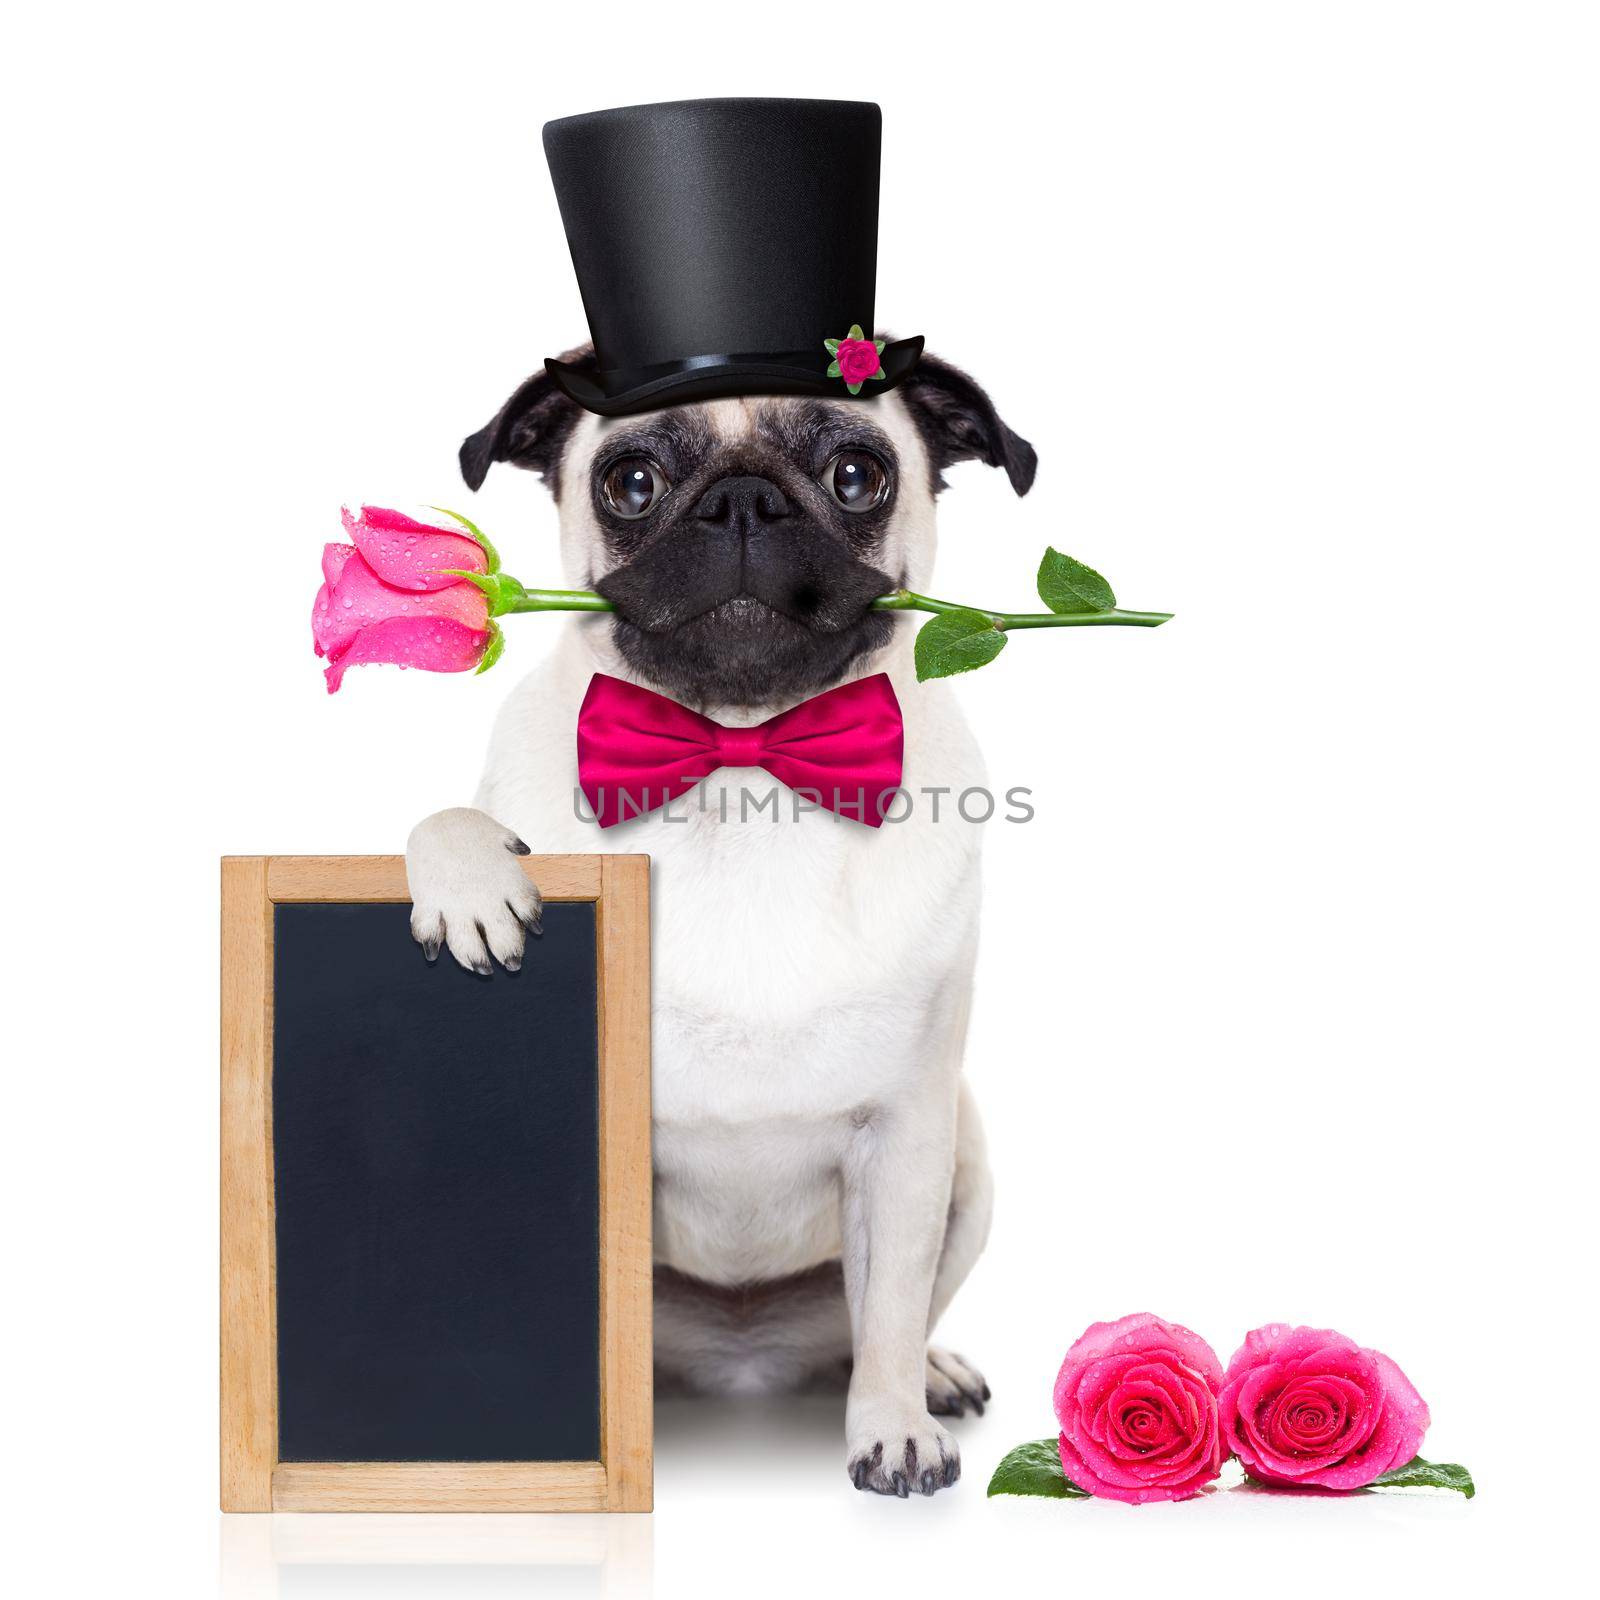 pug   dog looking and staring at you   , with a valentines rose in mouth,holding empty blank blackboard or placard,   isolated on white background